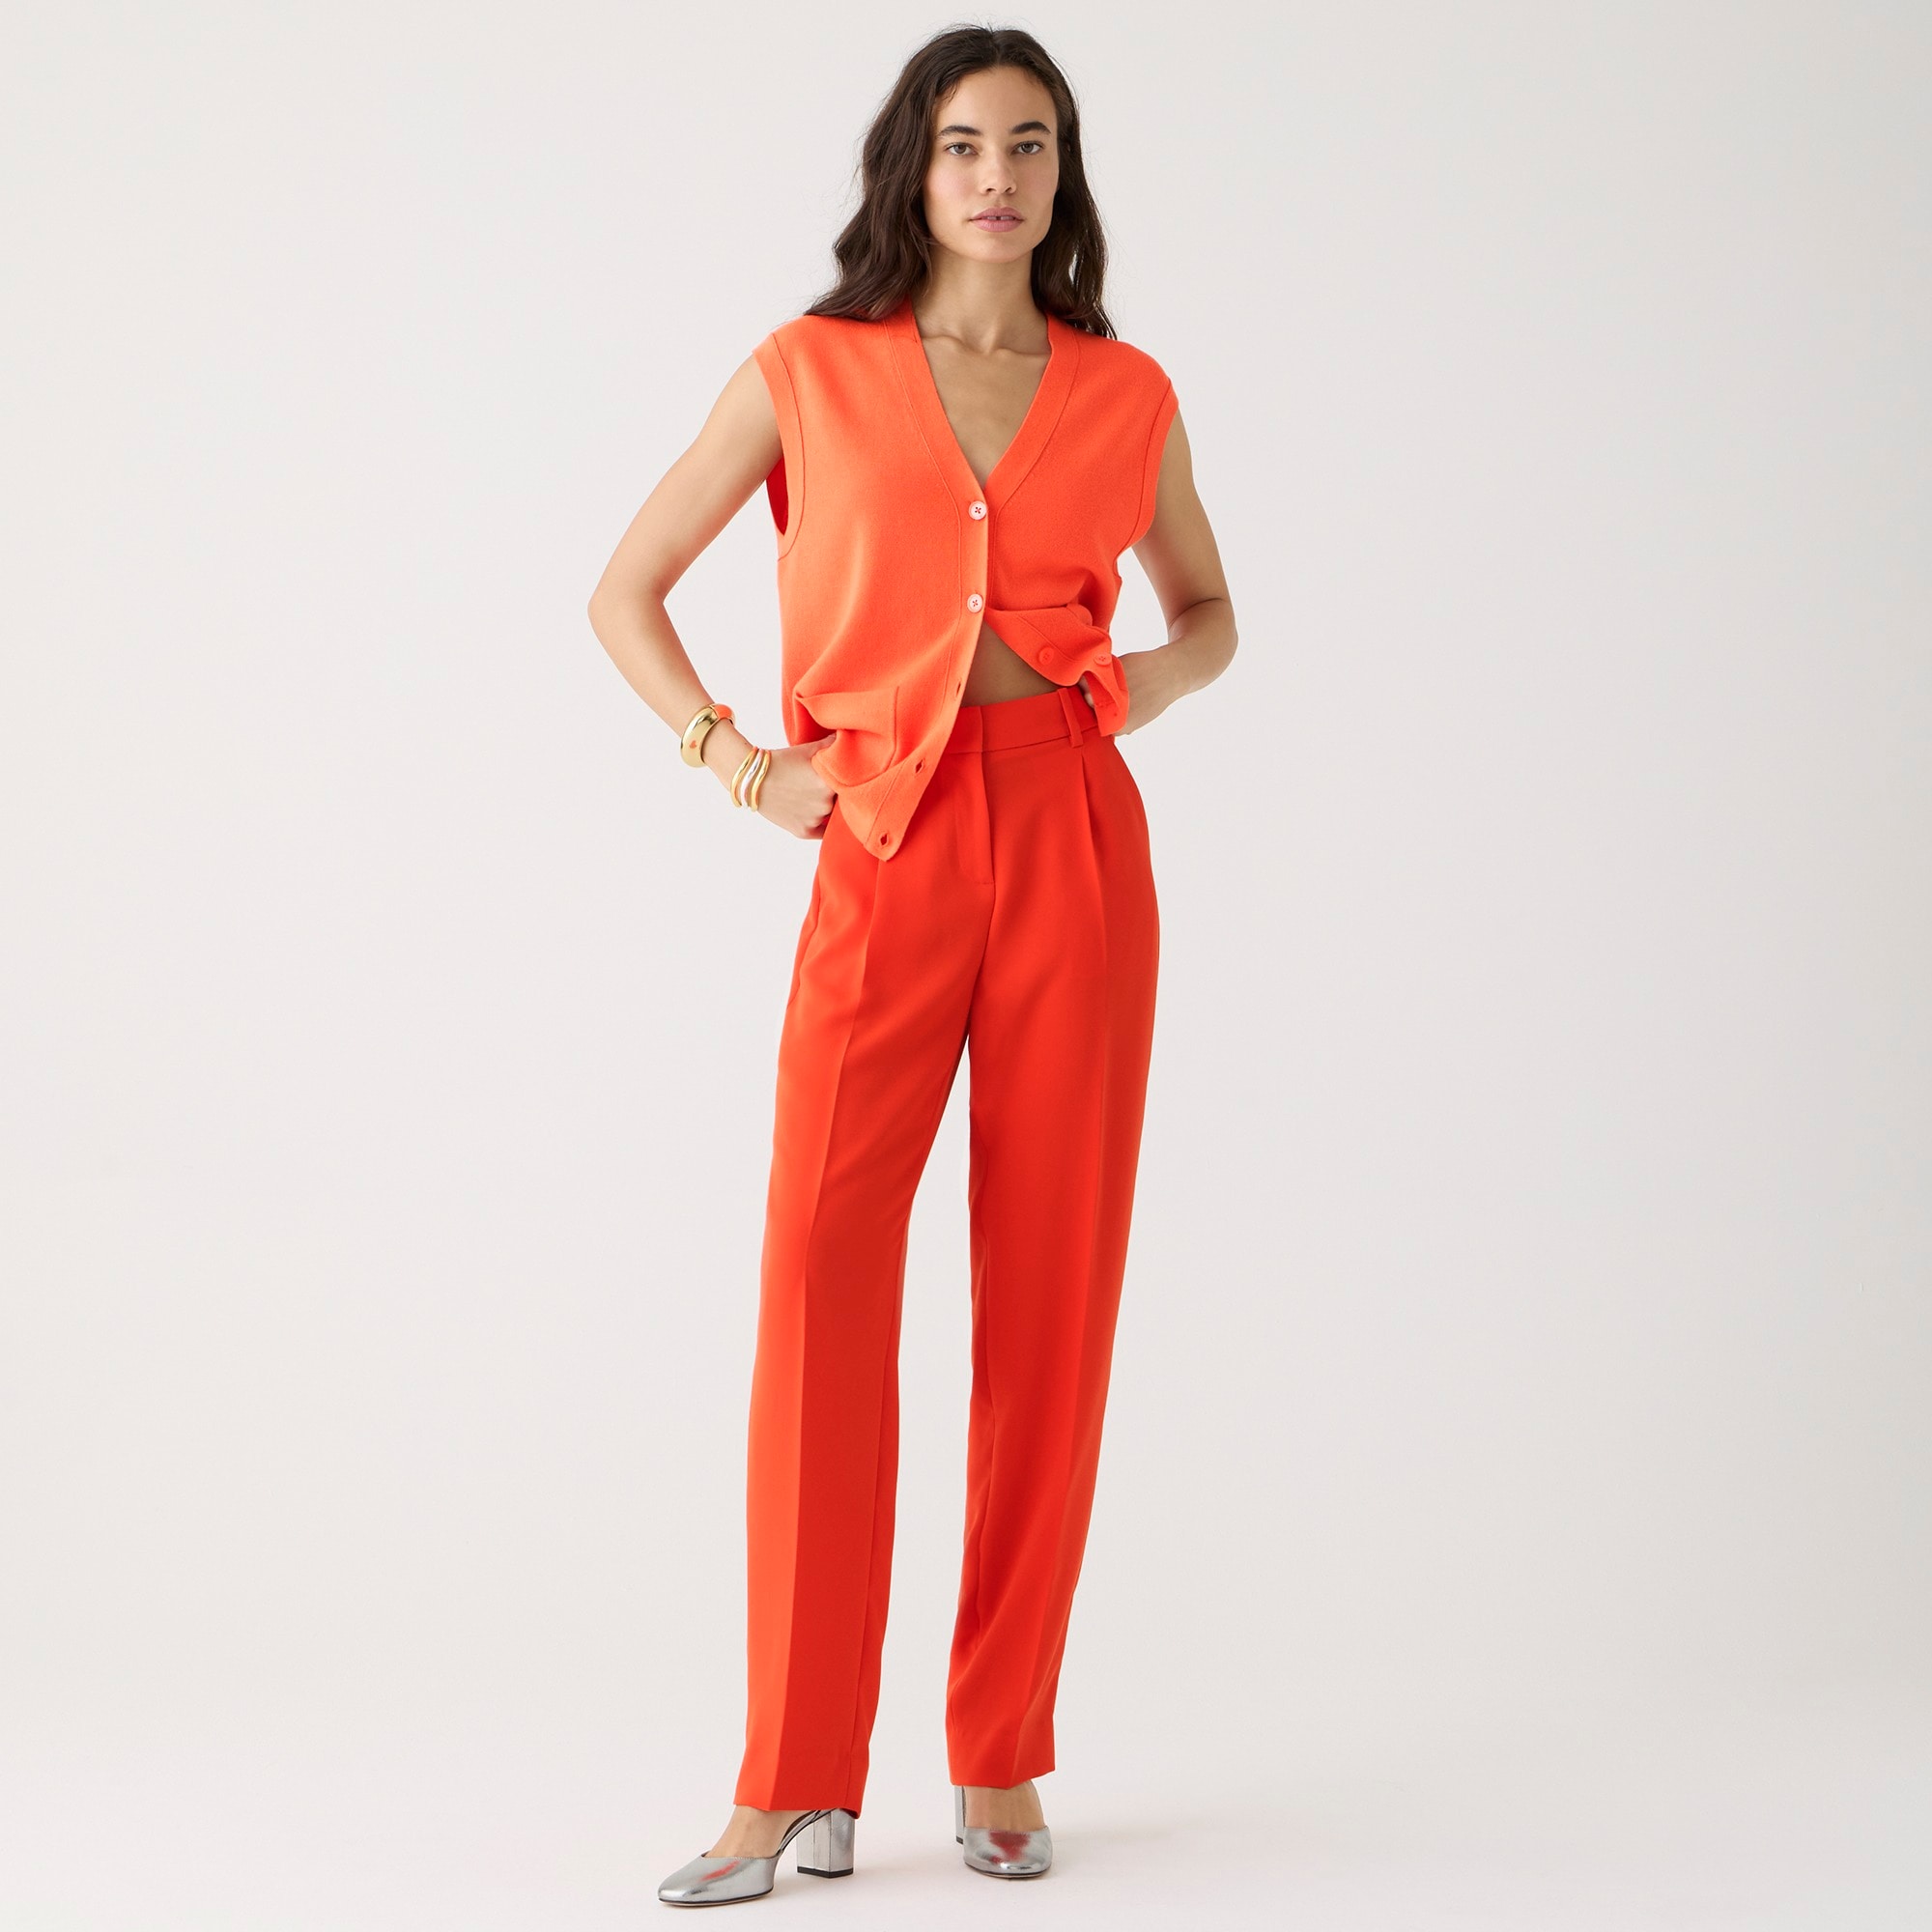  Tall relaxed drapey crepe trouser